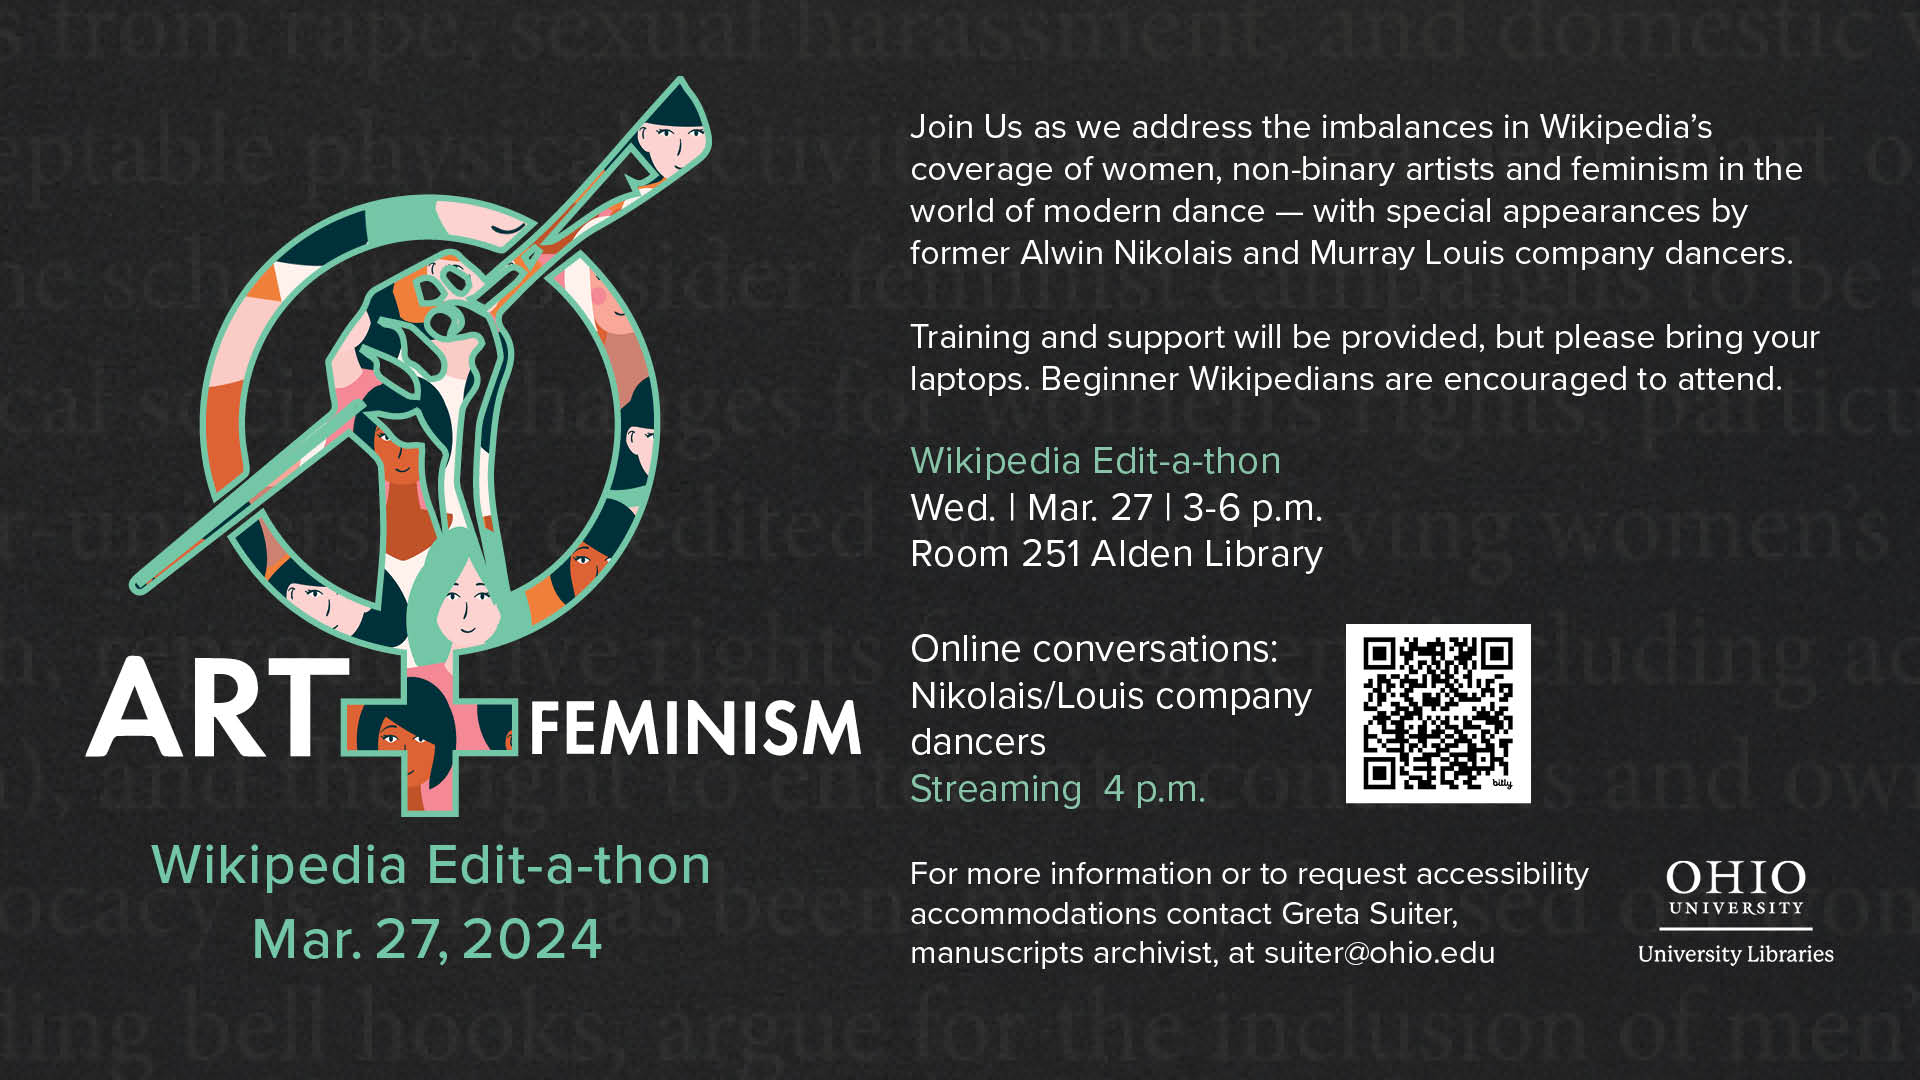 Art plus feminism informational banner image with event details as described on the rest of this page